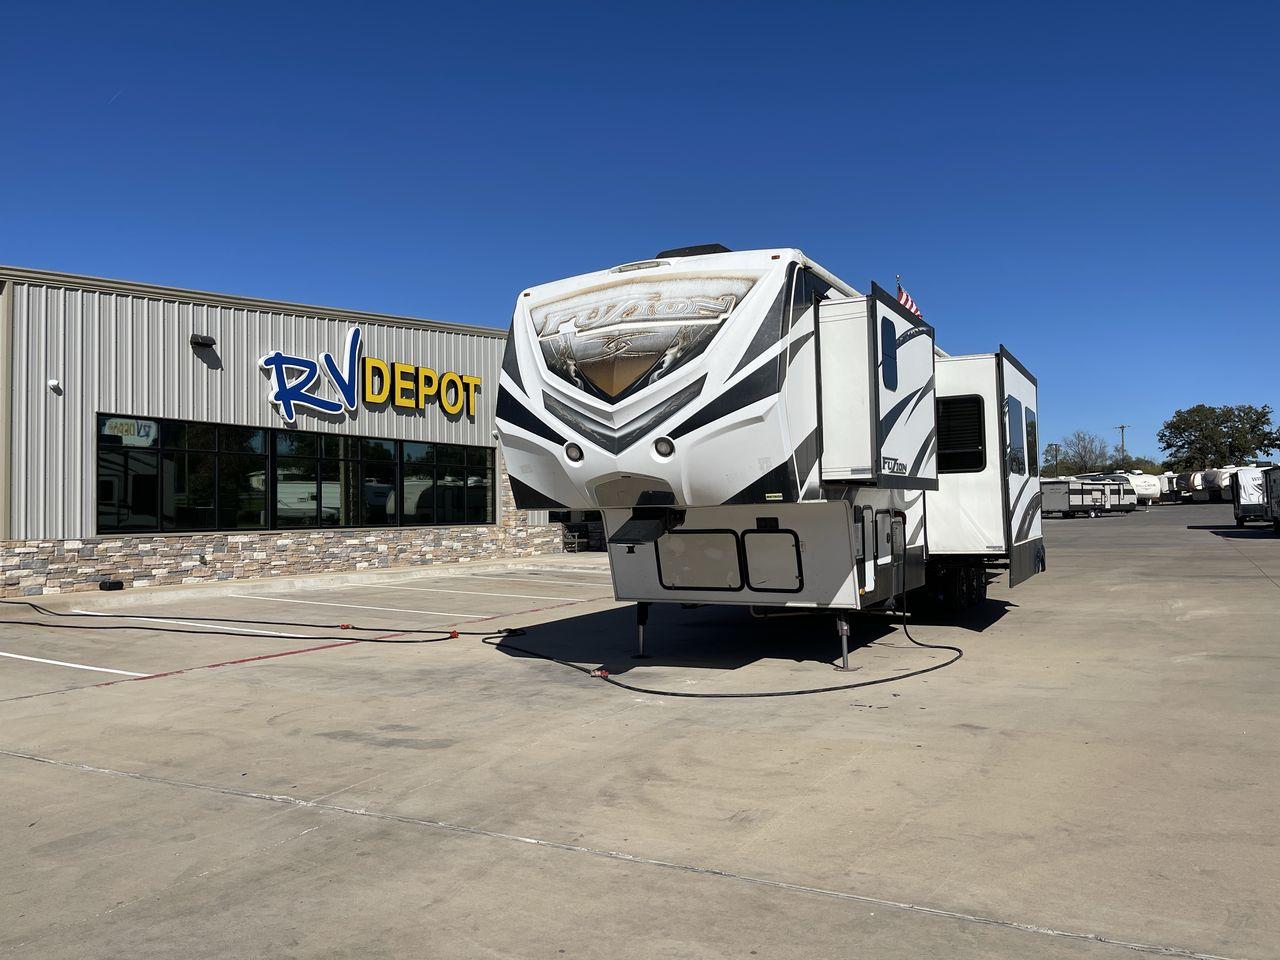 2014 WHITE FUZION FZ390 - (4YDF3903XEF) , Length: 43.08 ft. | Dry Weight: 15,185 lbs. | Gross Weight: 18,000 lbs. | Slides: 3 transmission, located at 4319 N Main St, Cleburne, TX, 76033, (817) 678-5133, 32.385960, -97.391212 - Looking for a Toy Hauler that will take your outdoor adventures to the next level? Look no further than this 2014 FUZION FZ390, available for sale at RV Depot in Cleburne, TX. With its impressive features and reliable performance, this Toy Hauler is the perfect companion for all your travel needs. - Photo #0